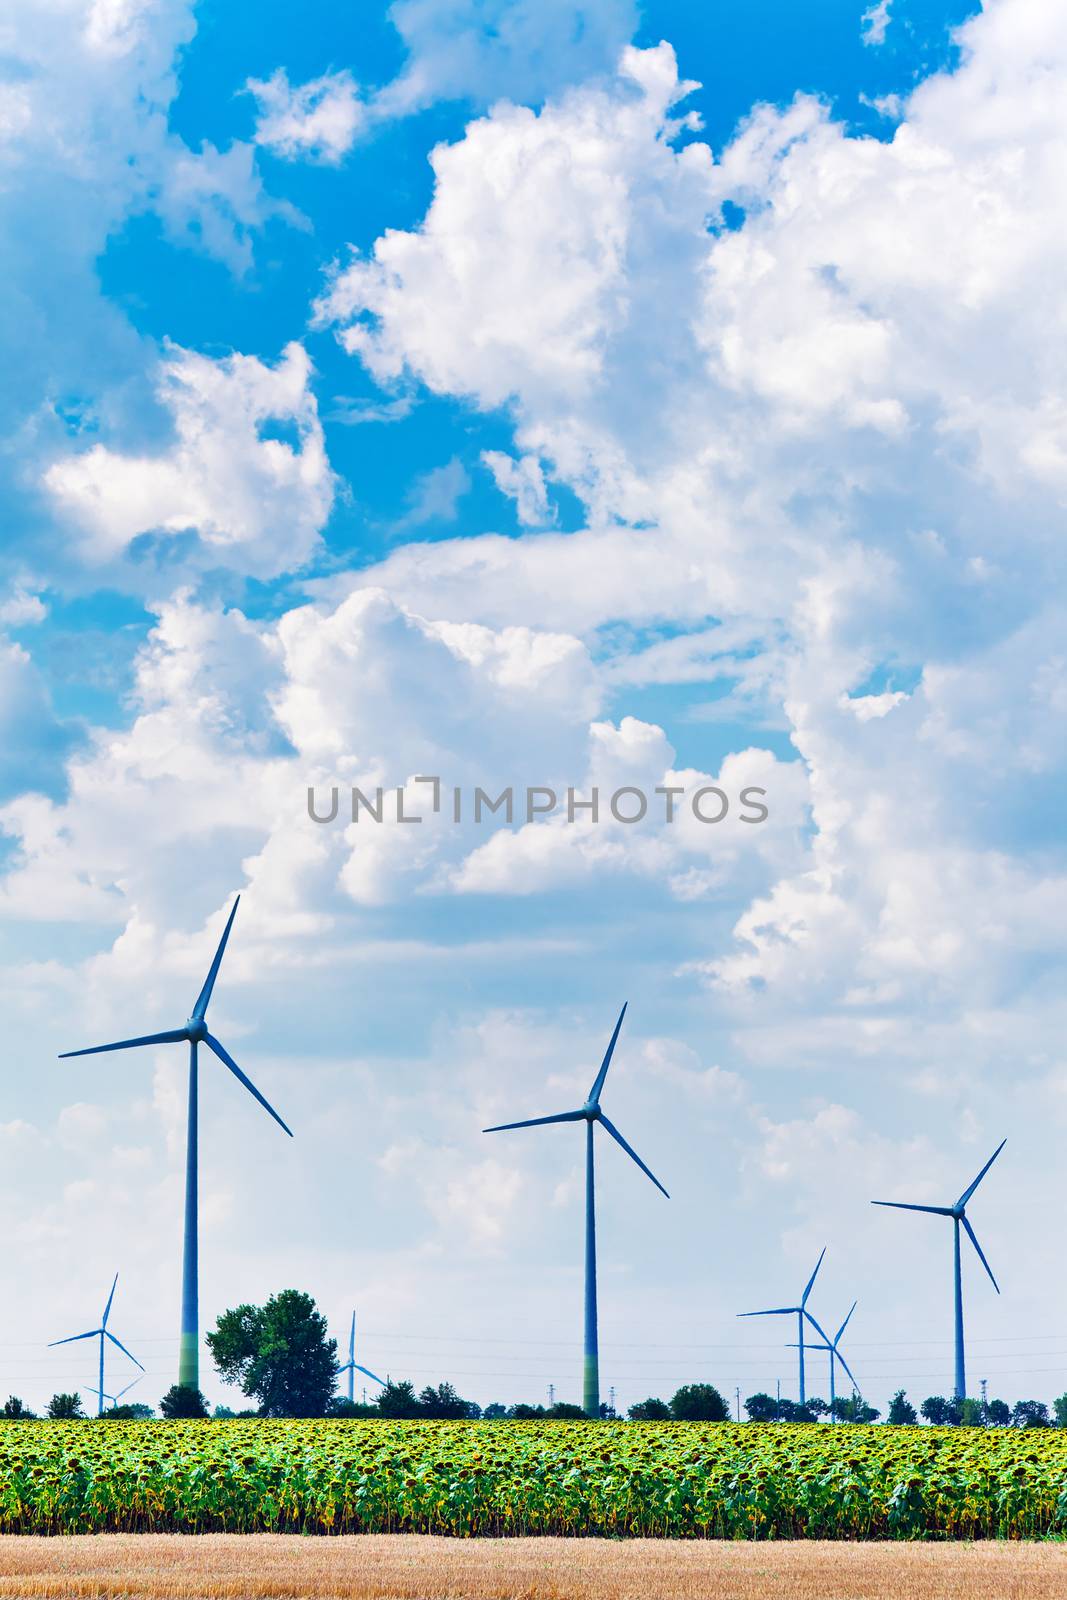 Wind turbine electricity generators installed in the field, under blue sky with white clouds and sunflowers infront. Vertical image.